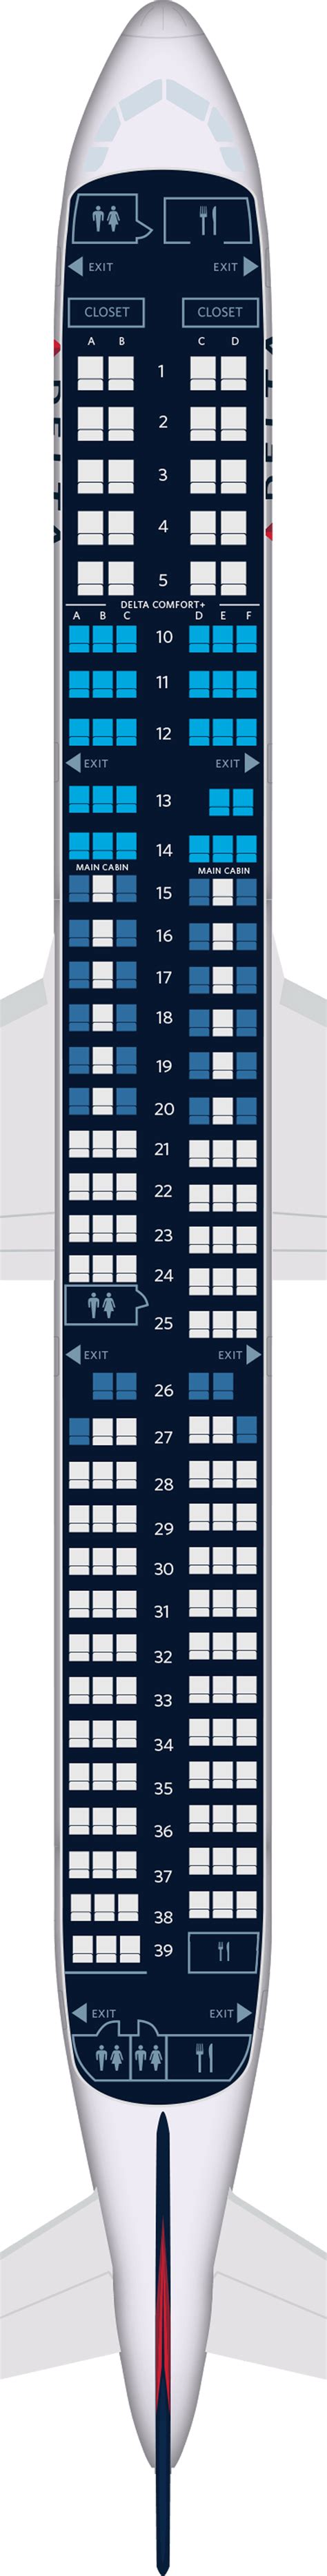 American Airlines A Sharklets Seating Chart Elcho Table